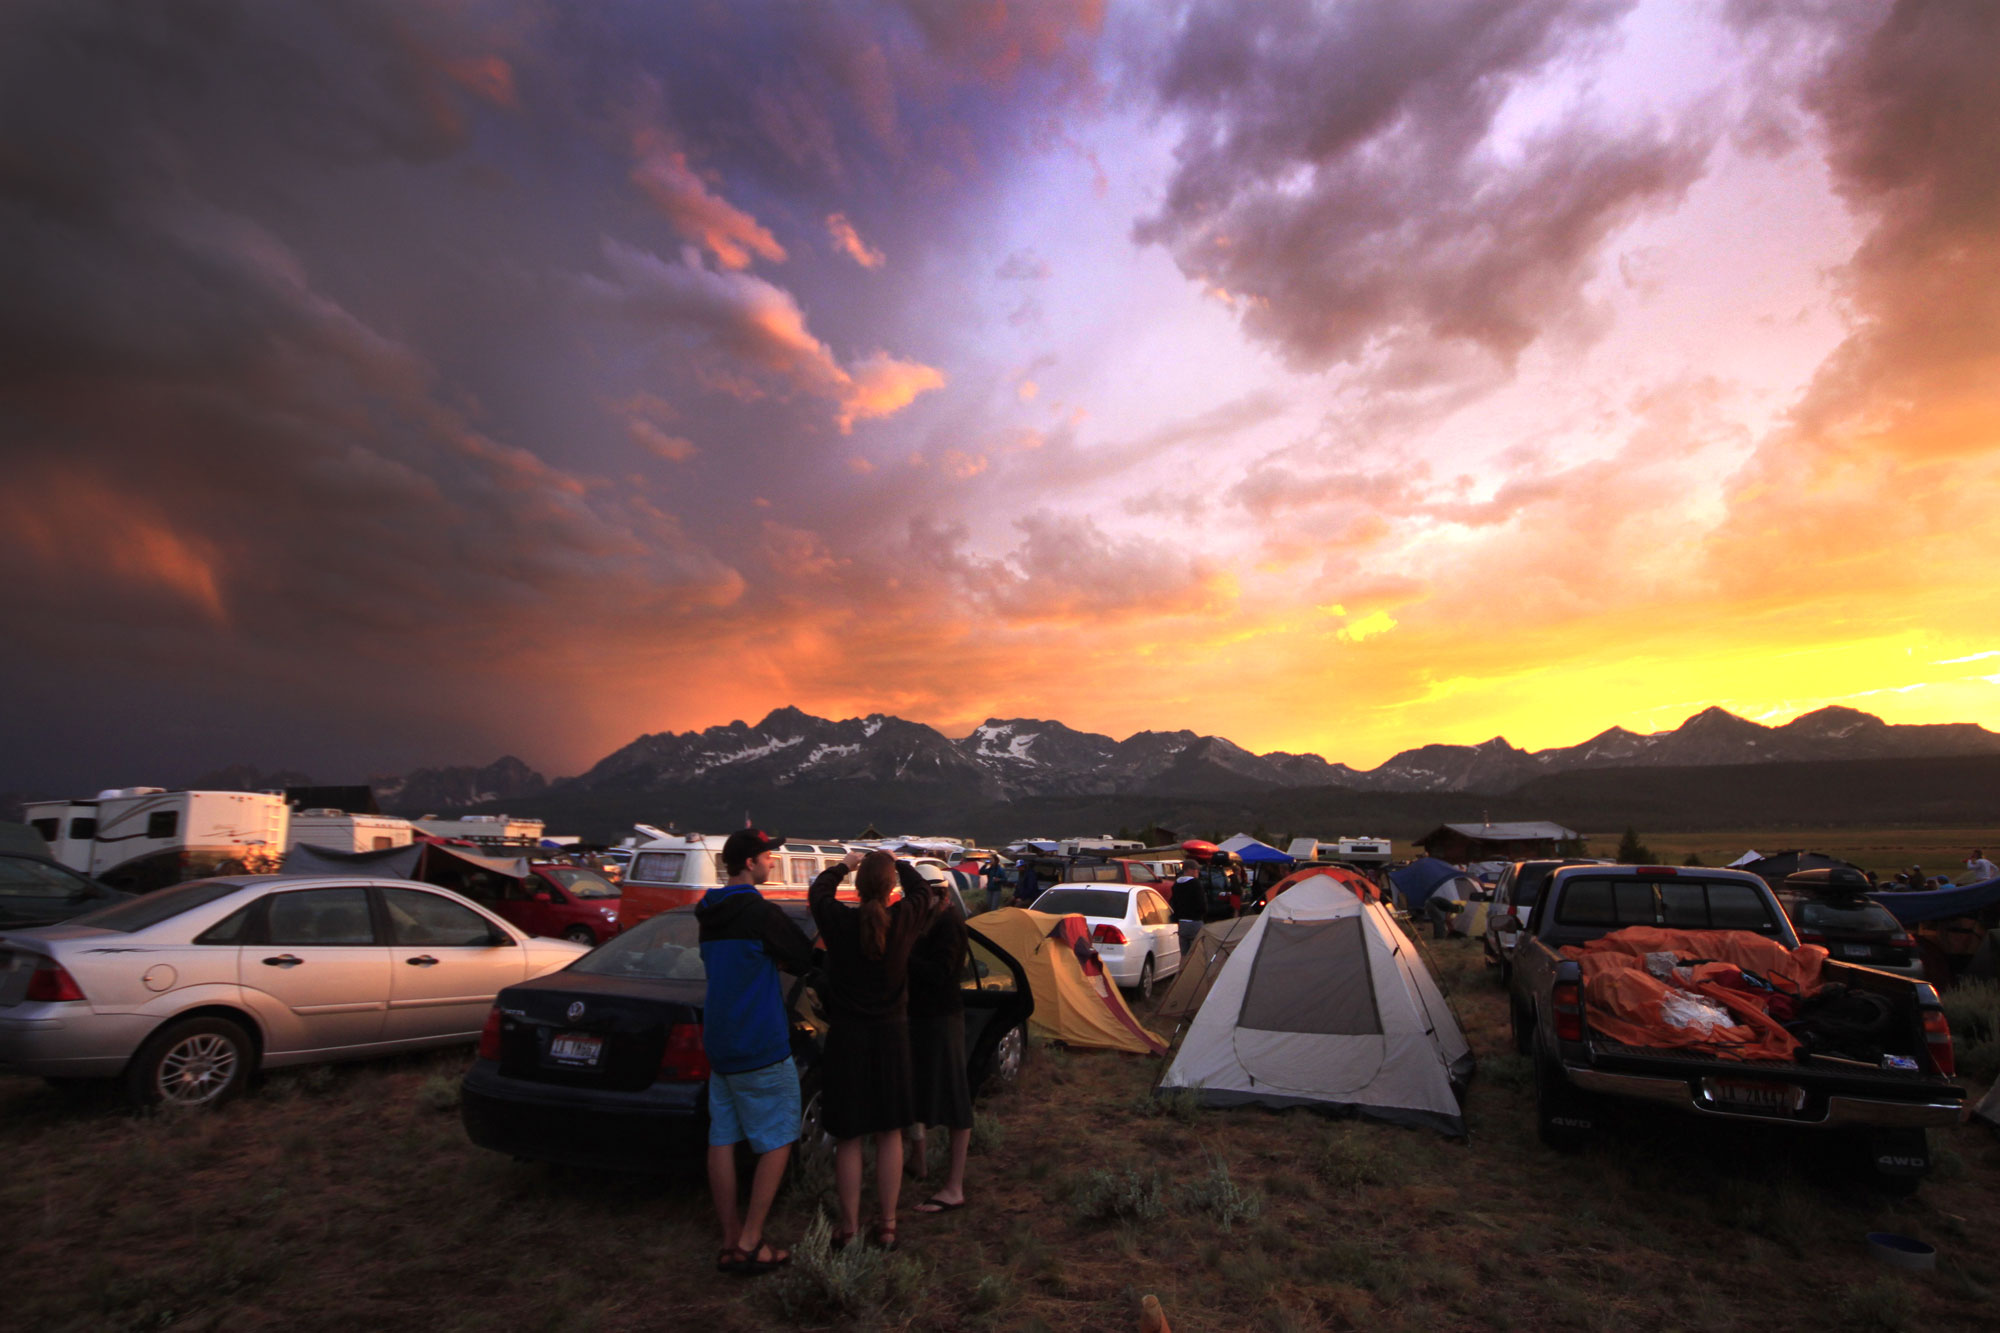 World's most scenic festival. Sawtooth Music Festival, Stanley, ID